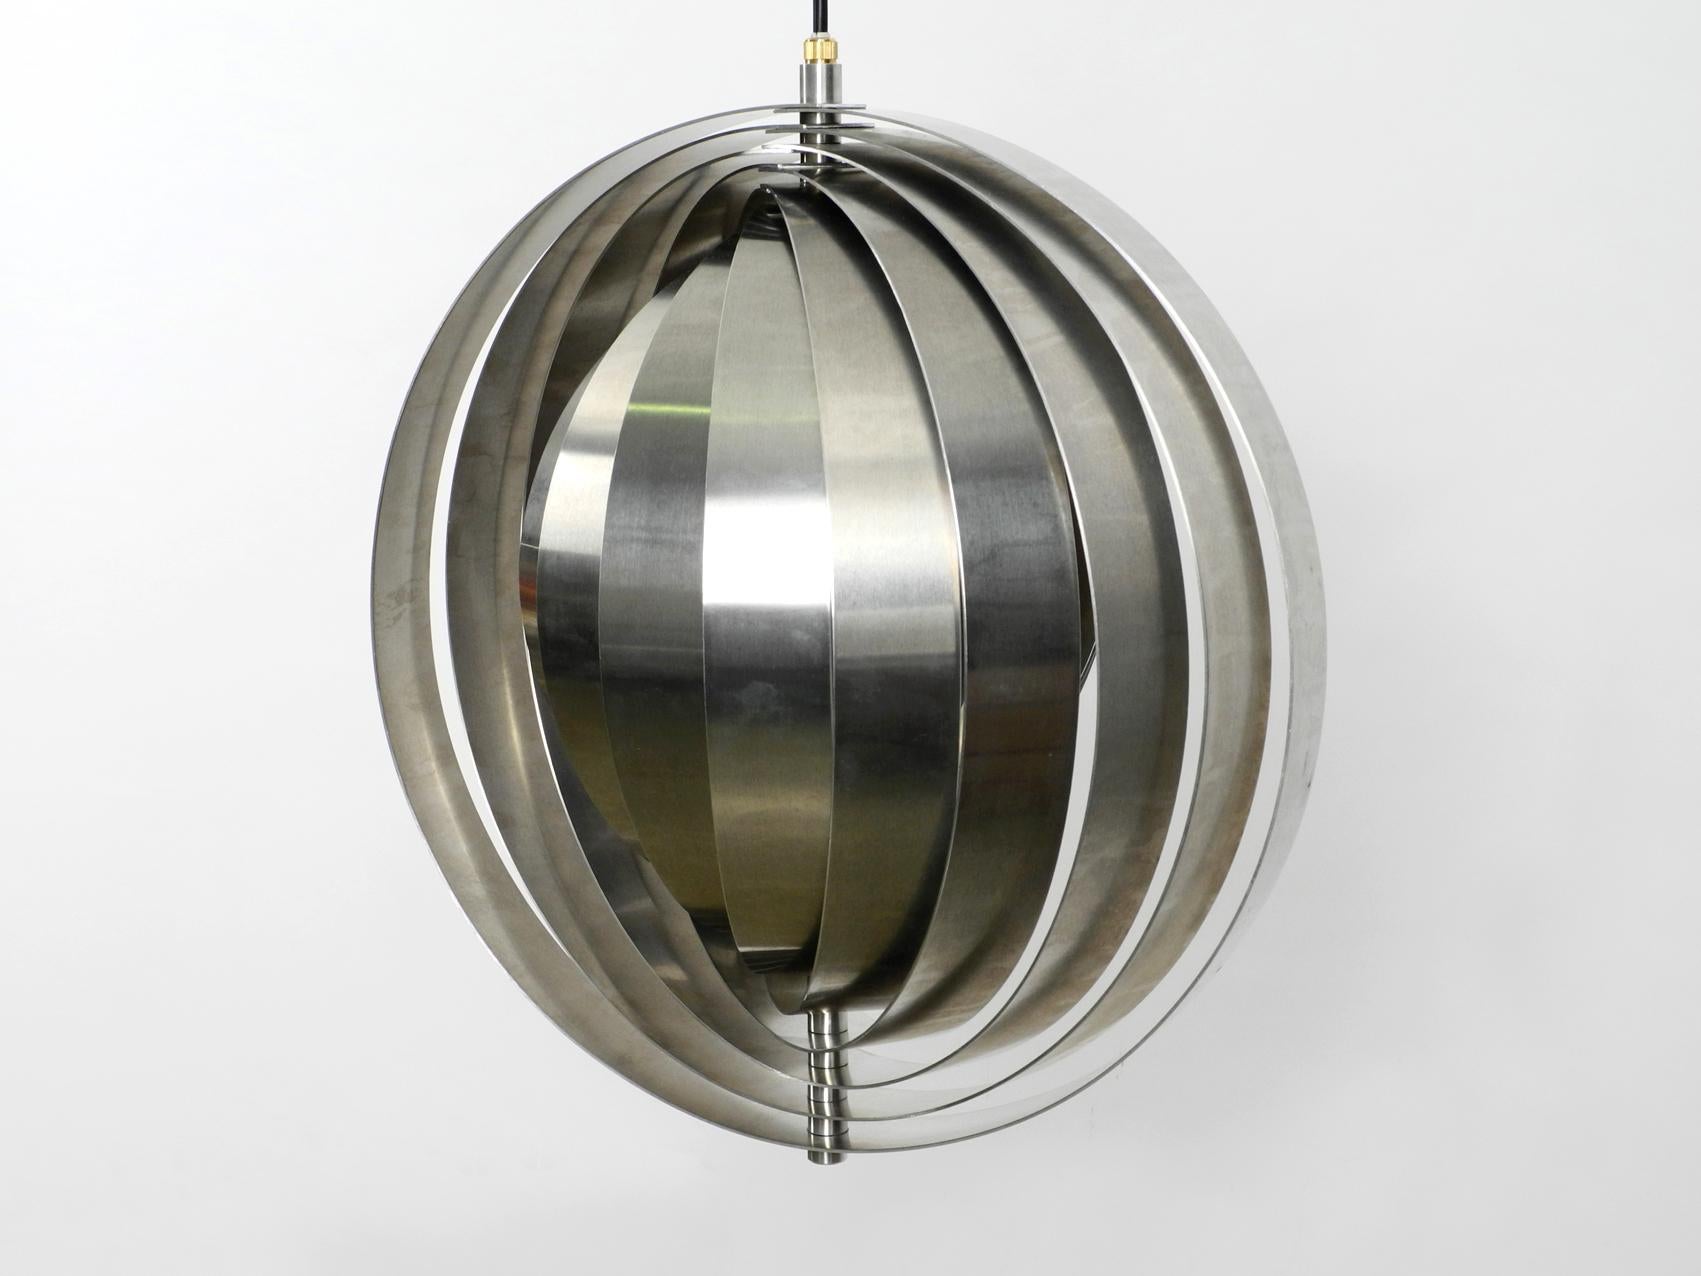 1960s Space Age Moon Lamp Made of Brushed Stainless Steel Solid Construction 7